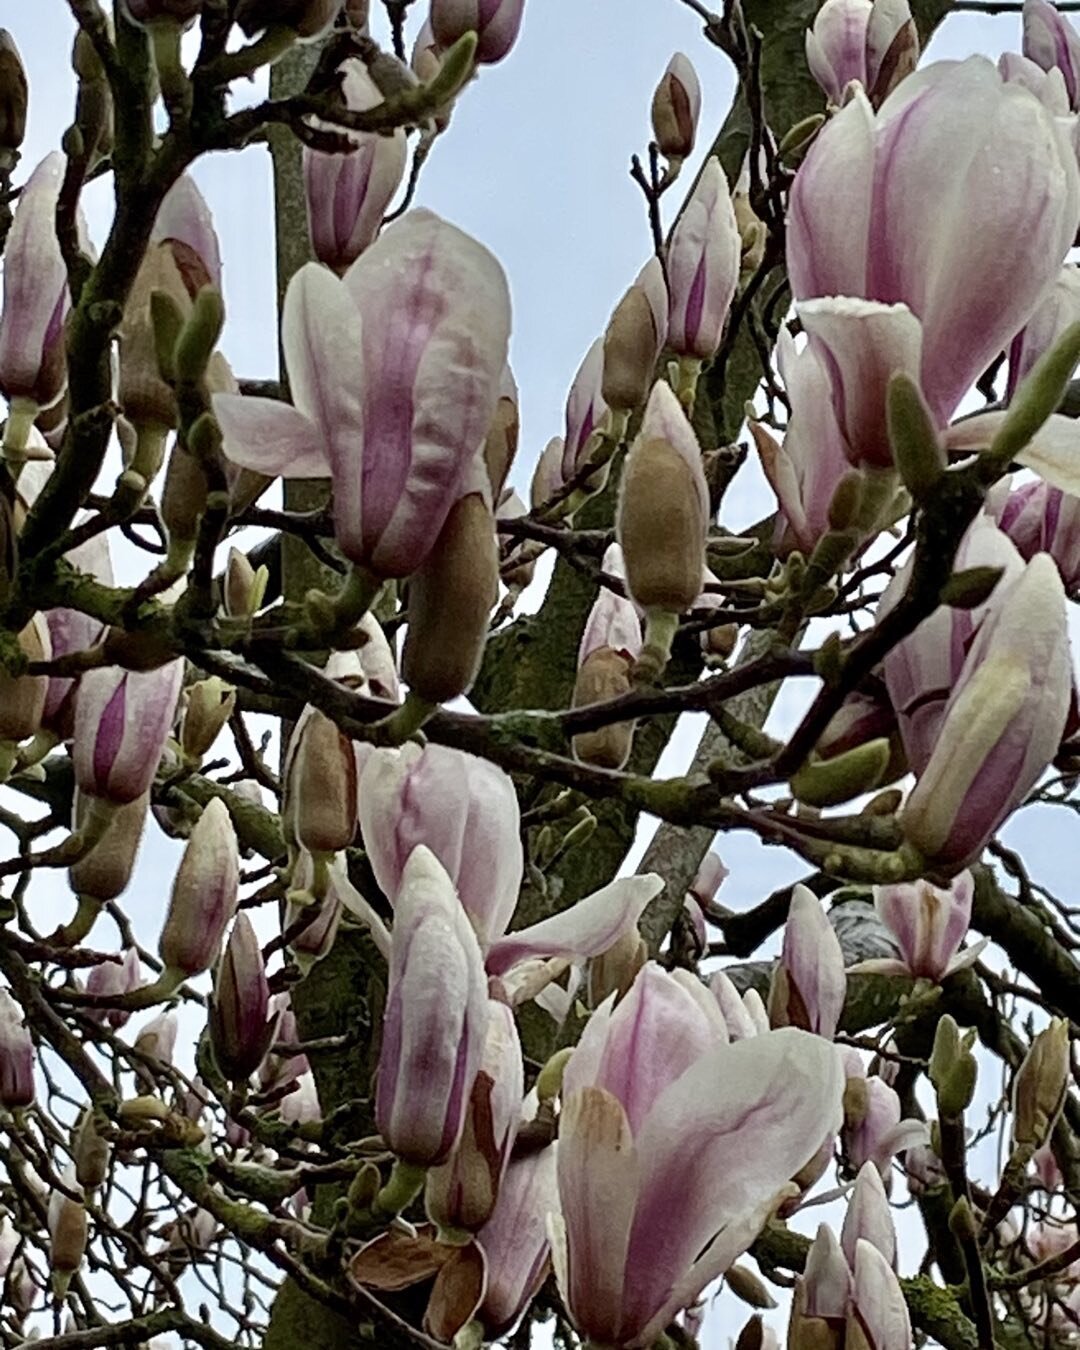 Magnolia
It&rsquo;s out

Magnolia is such a herald of Spring

#magnolia #springtime #springday #springflowers #springflowers🌷 #englishspring #floweringtreesofinstagram #floweringtreesofspring #lesleyseegerpaintings #paintingcourses #lesleyseegerpain